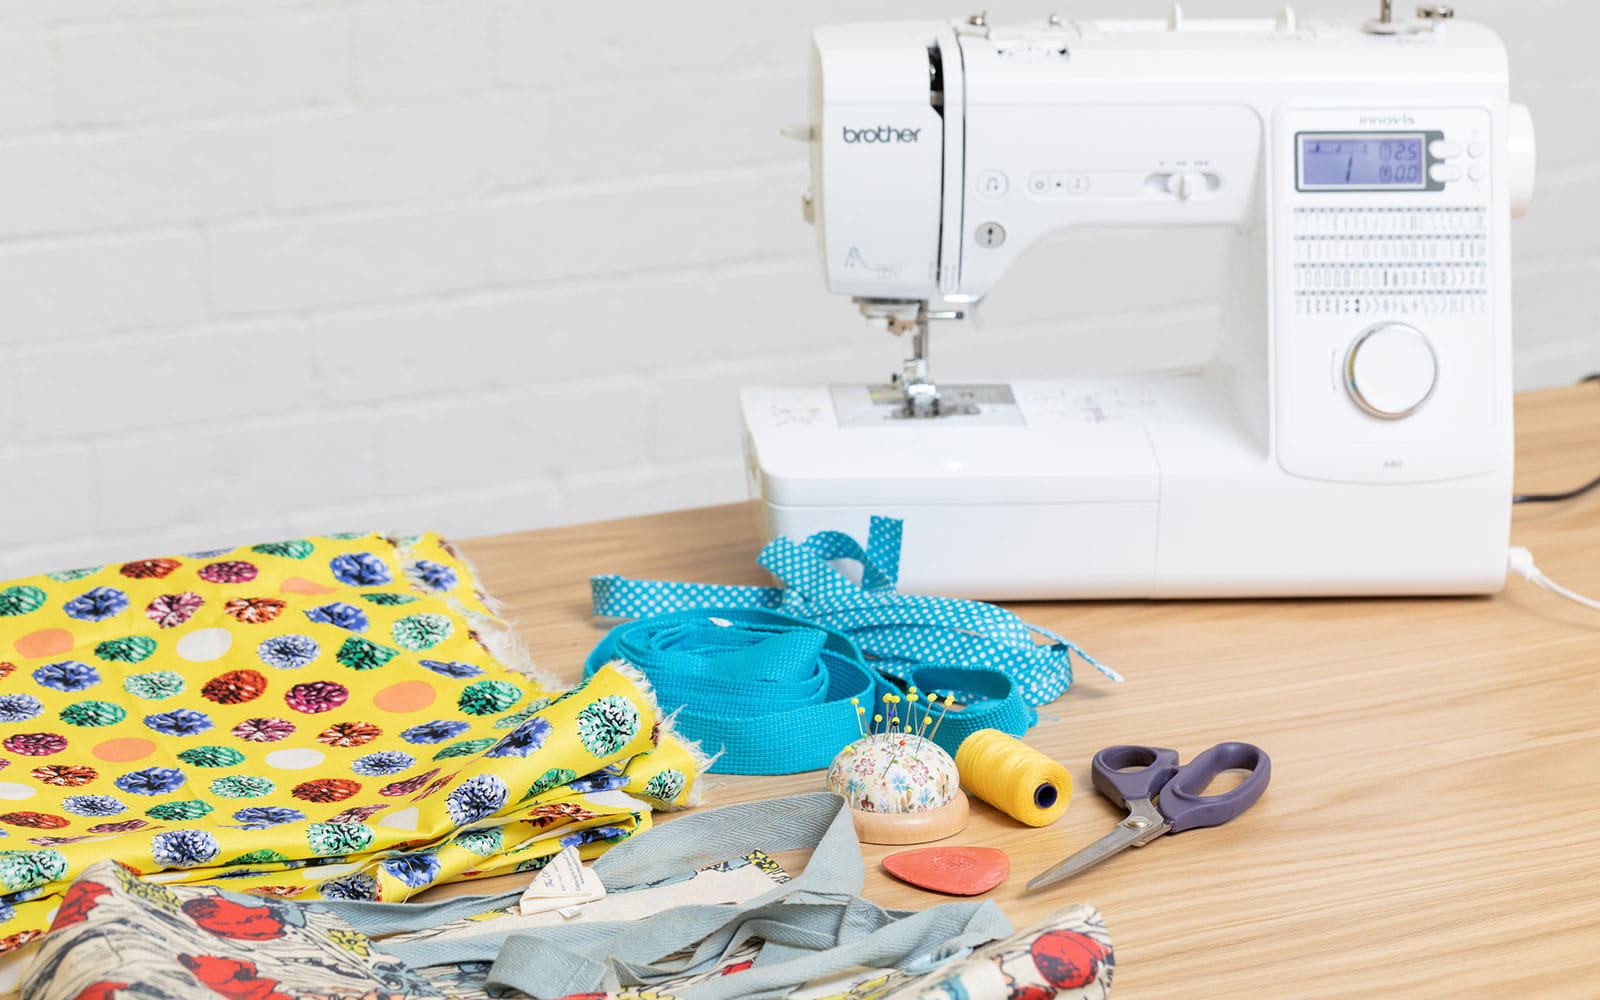 sewing materials to make apron and sewing machine on table